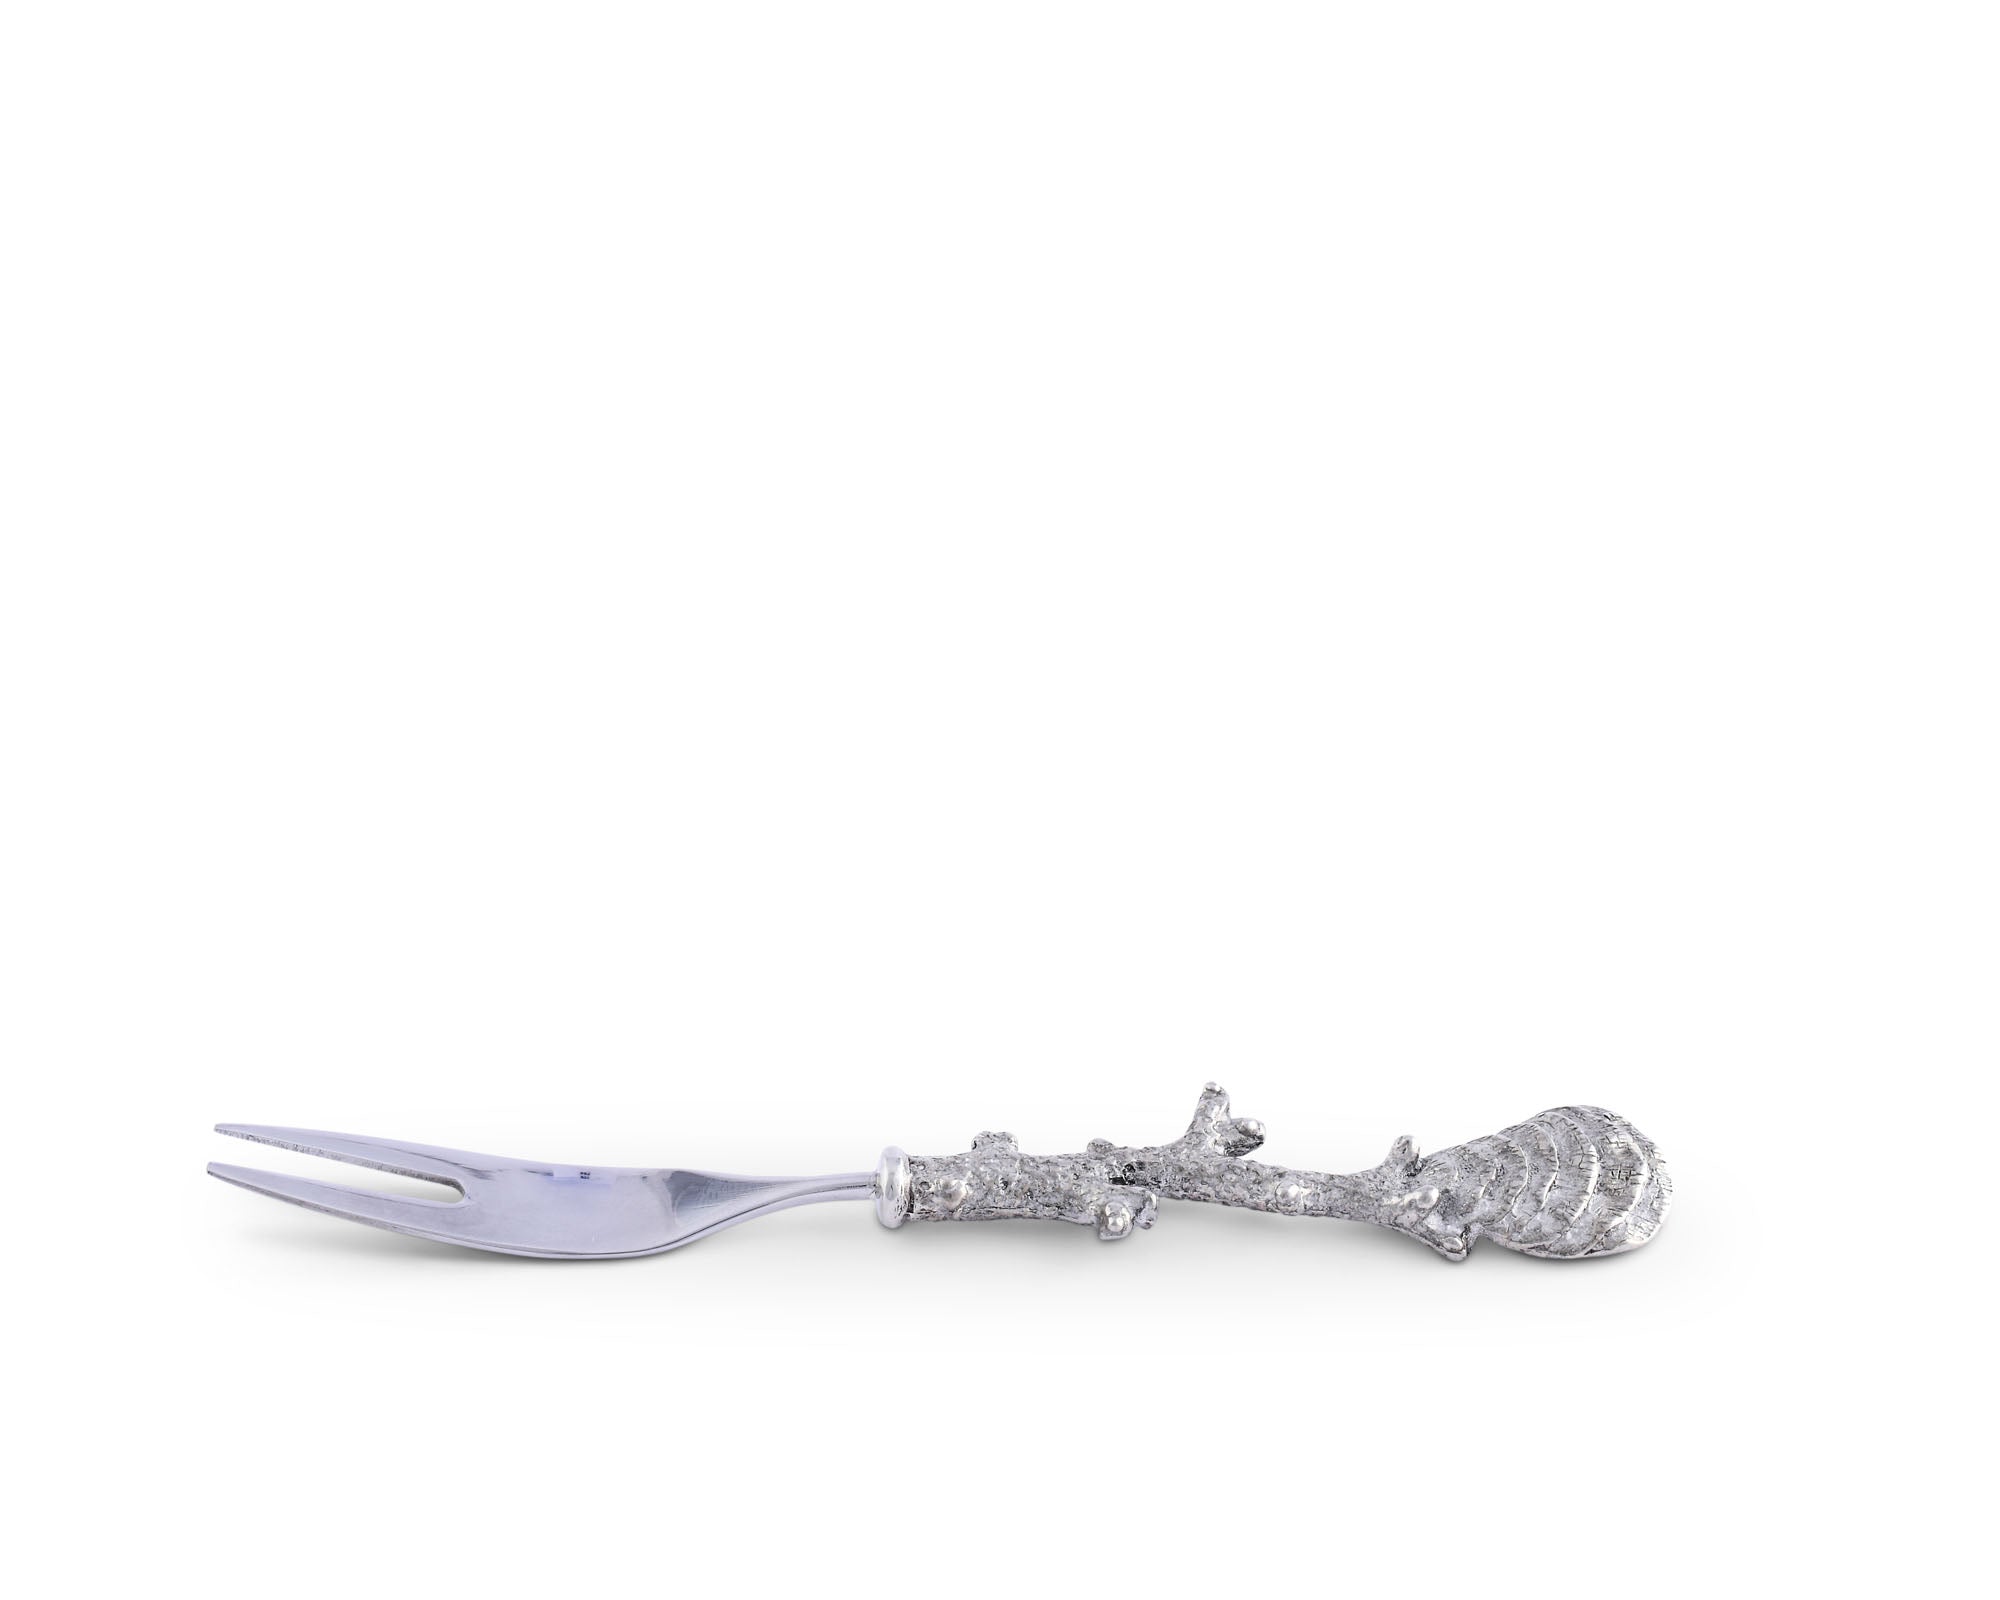 Vagabond House Coral Hors d'oeuvre Fork Product Image